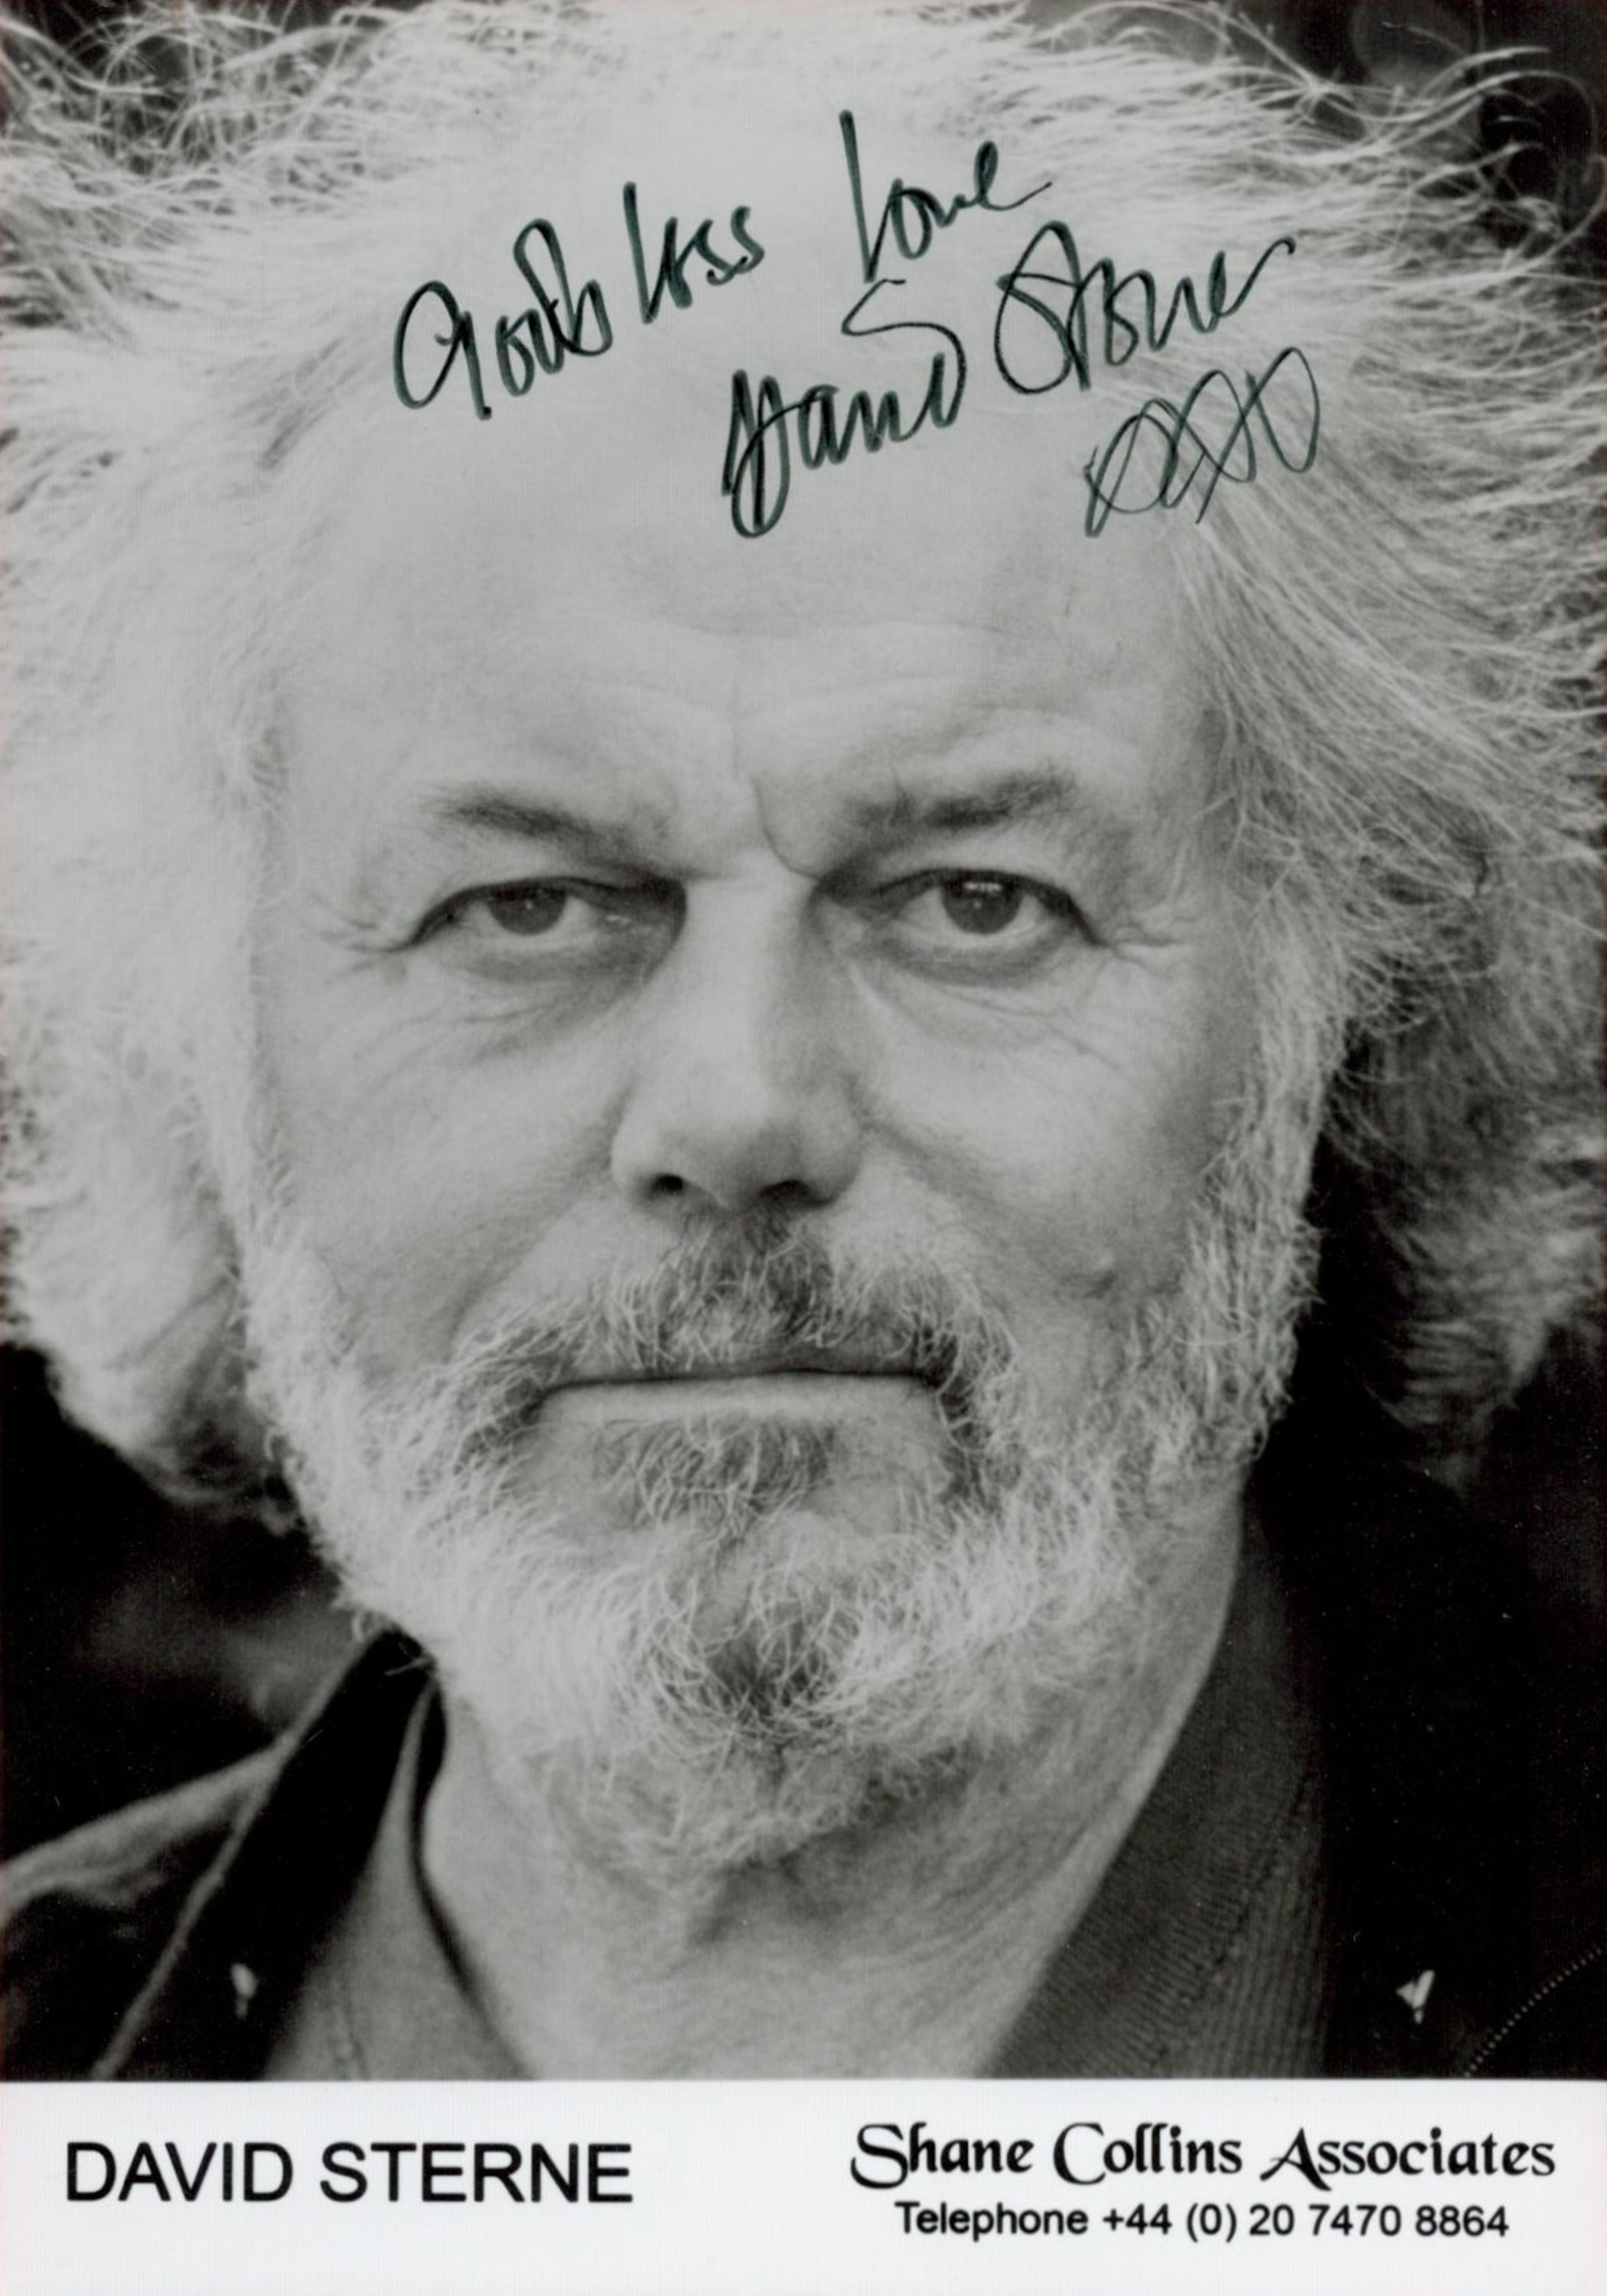 English Actor David Sterne Signed 6x4 inch Black and White Photo. Good condition. All autographs